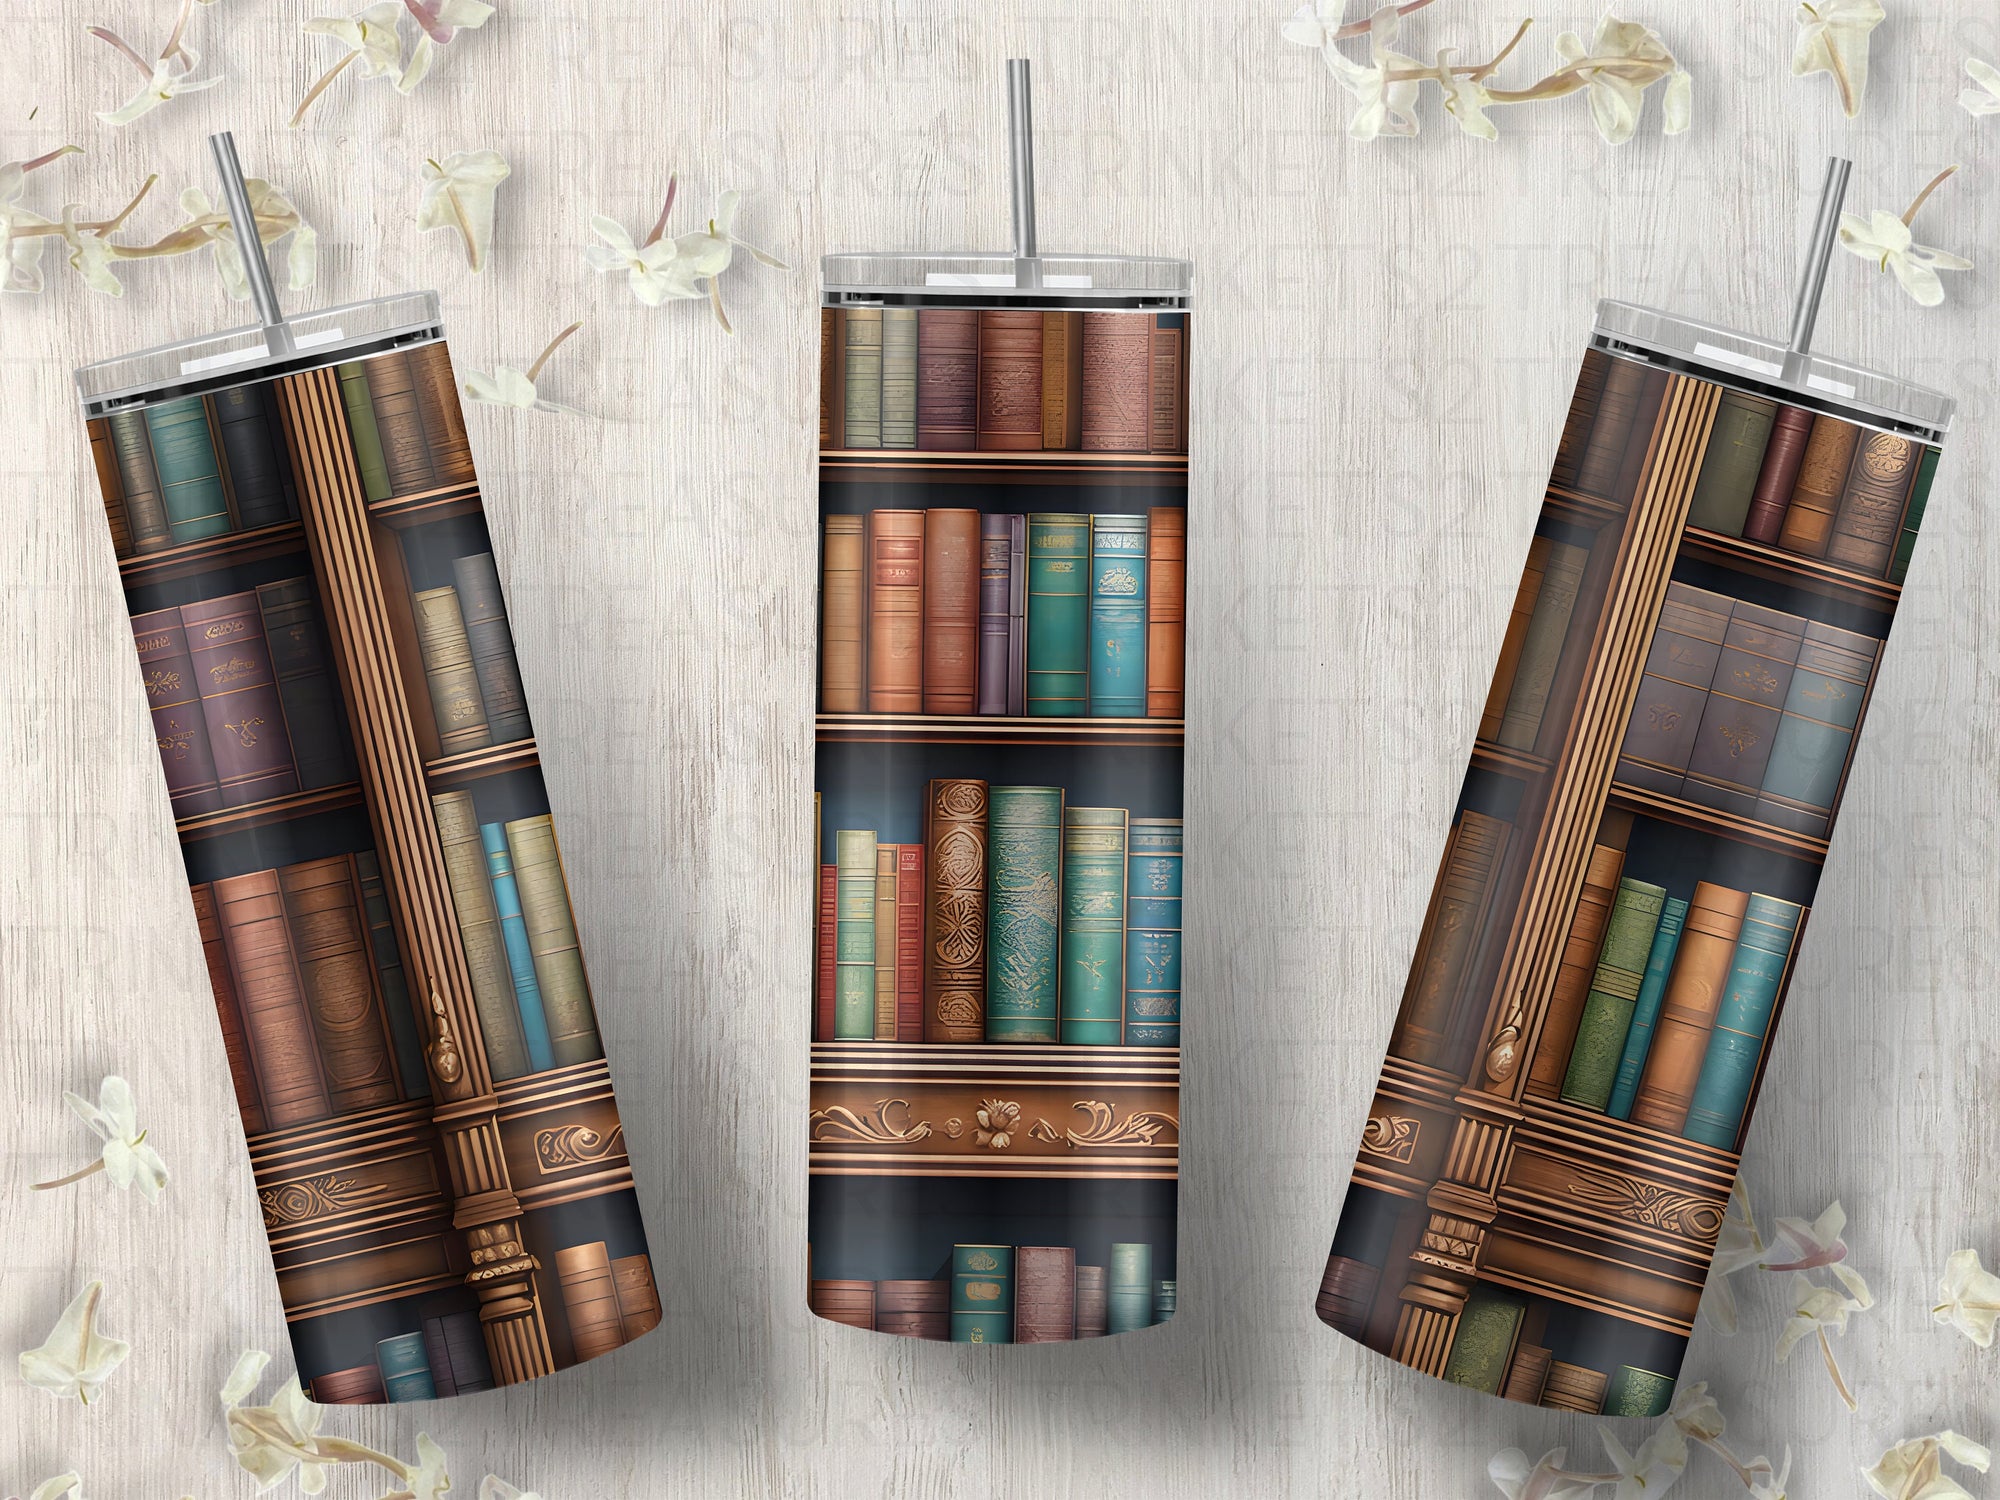 Personalized 20 oz Stainless Steel Tumbler/Includes Metal Straw/Library & Books Design/#317